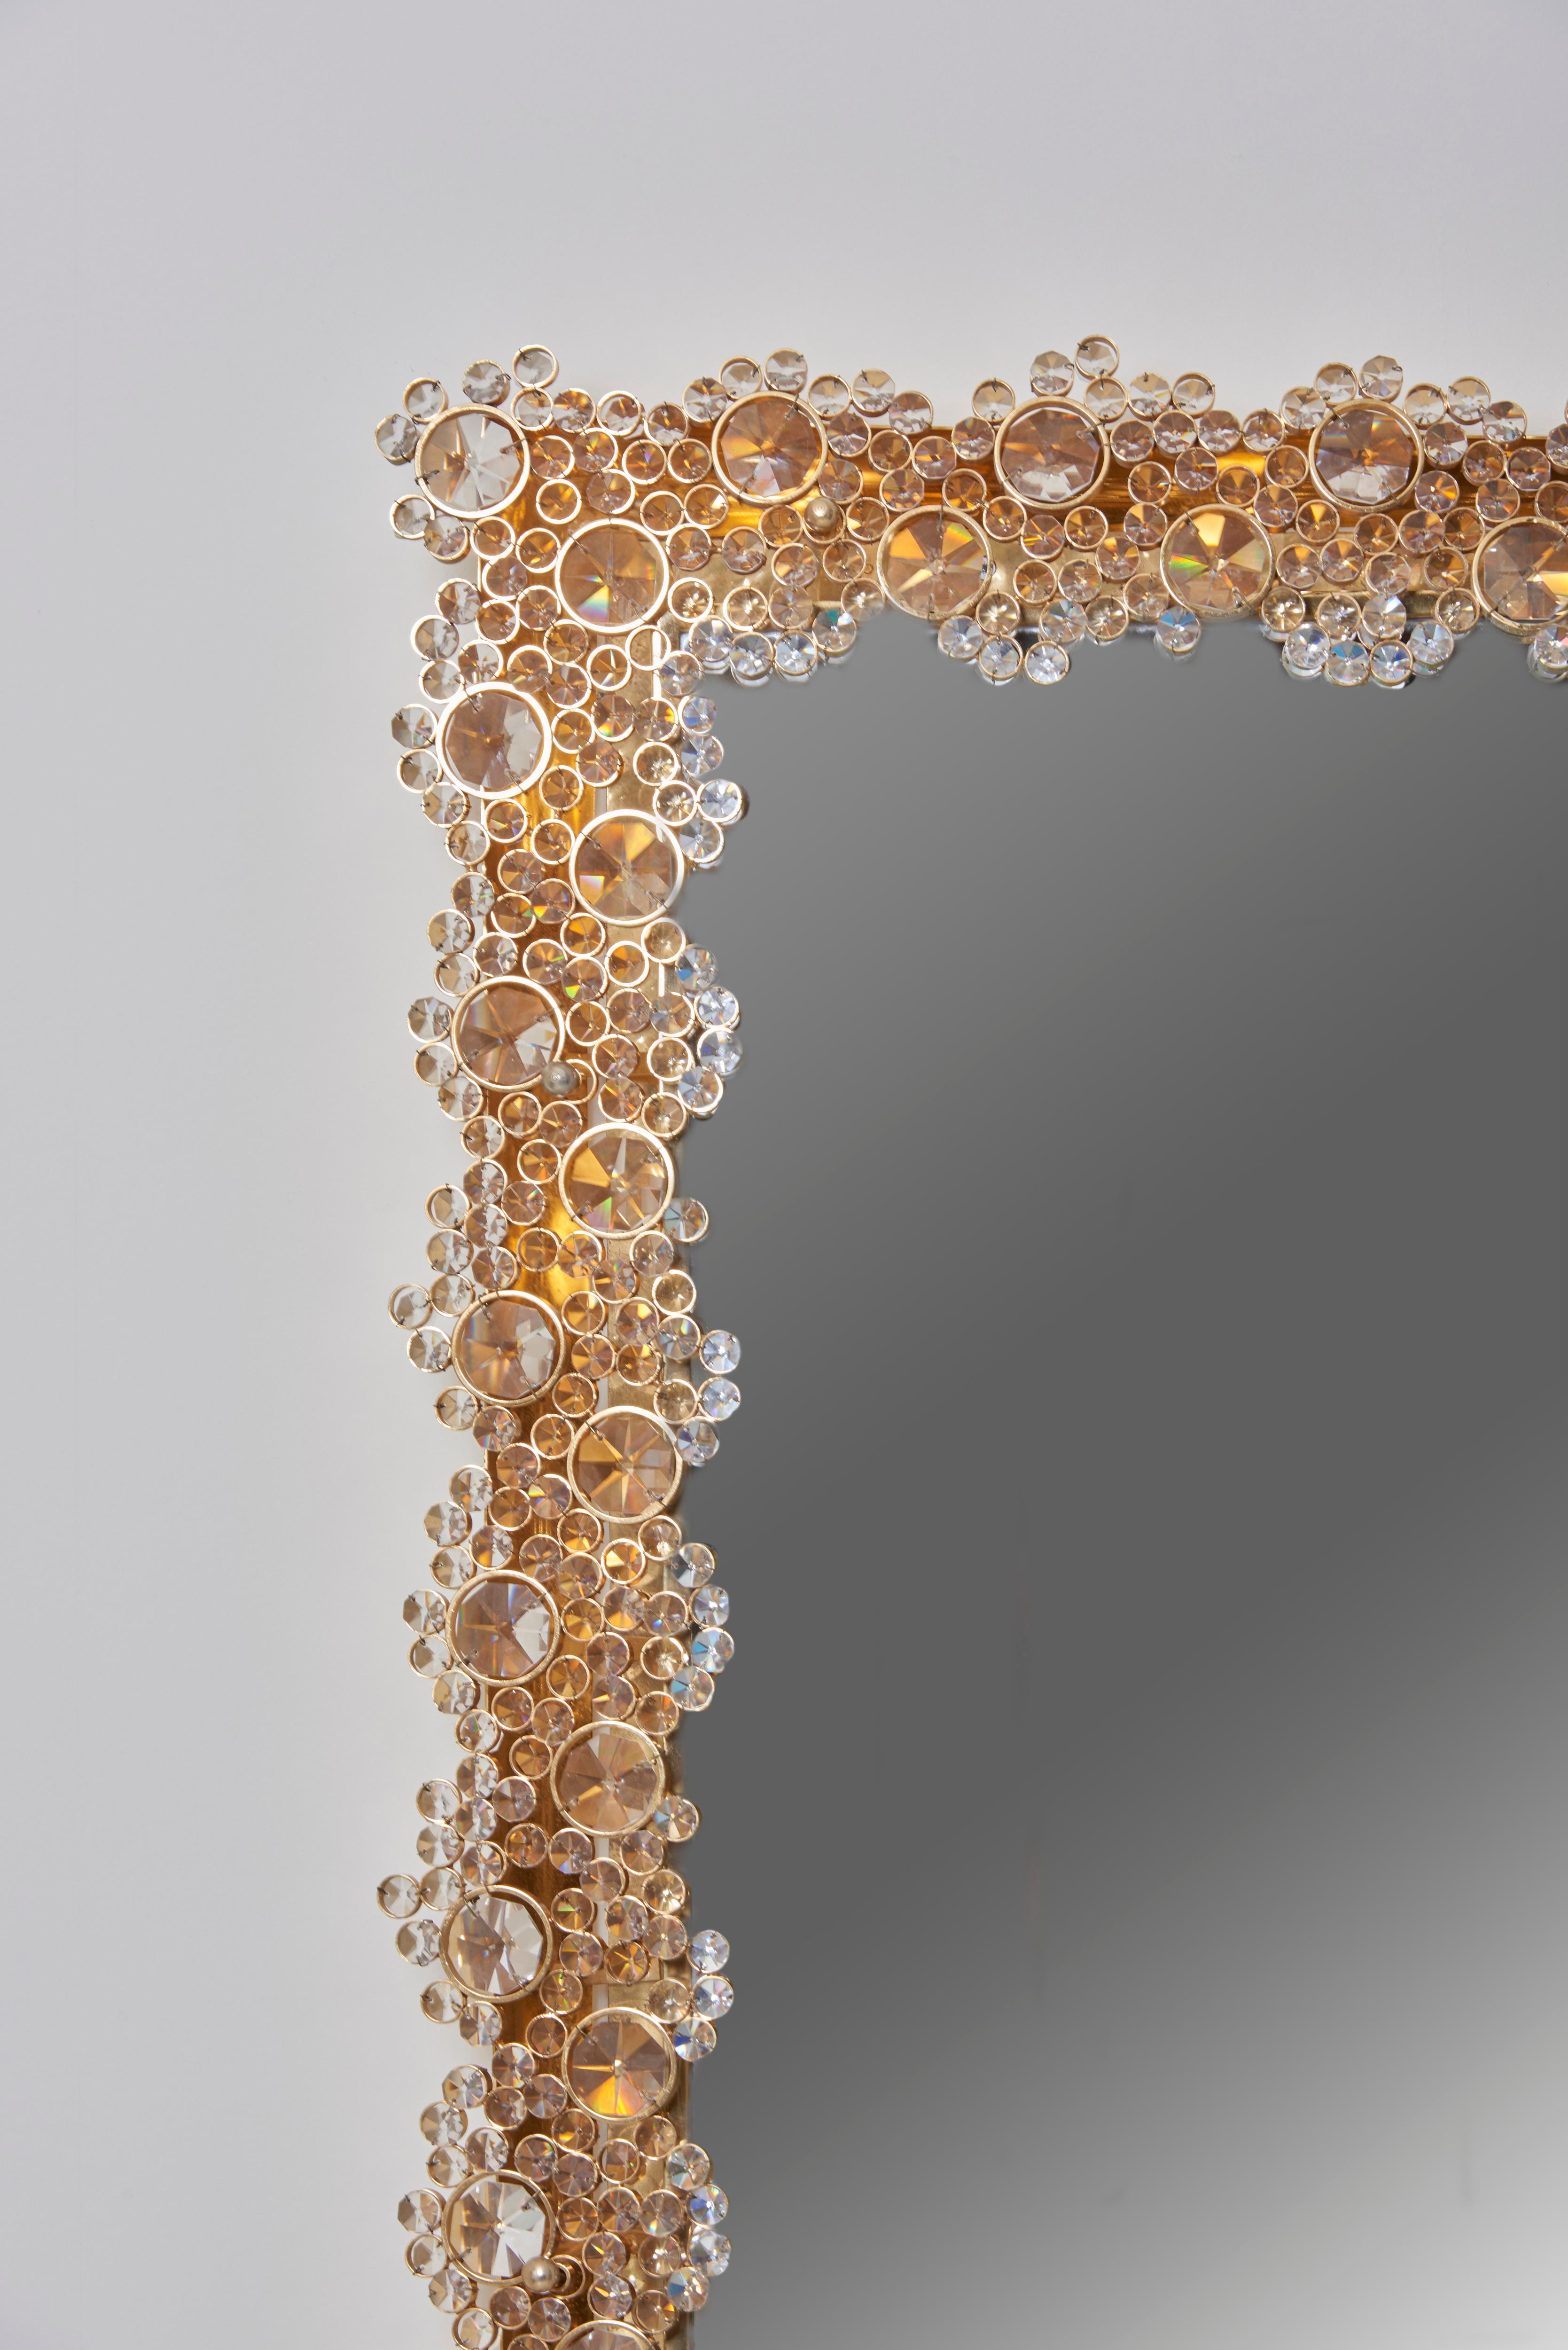 Outstanding illuminated mirror, Model S100W by Palwa.
Made of gold-plated metal and crystal glass.
28 x E14 bulbs.

We also have a matching round mirror in stock